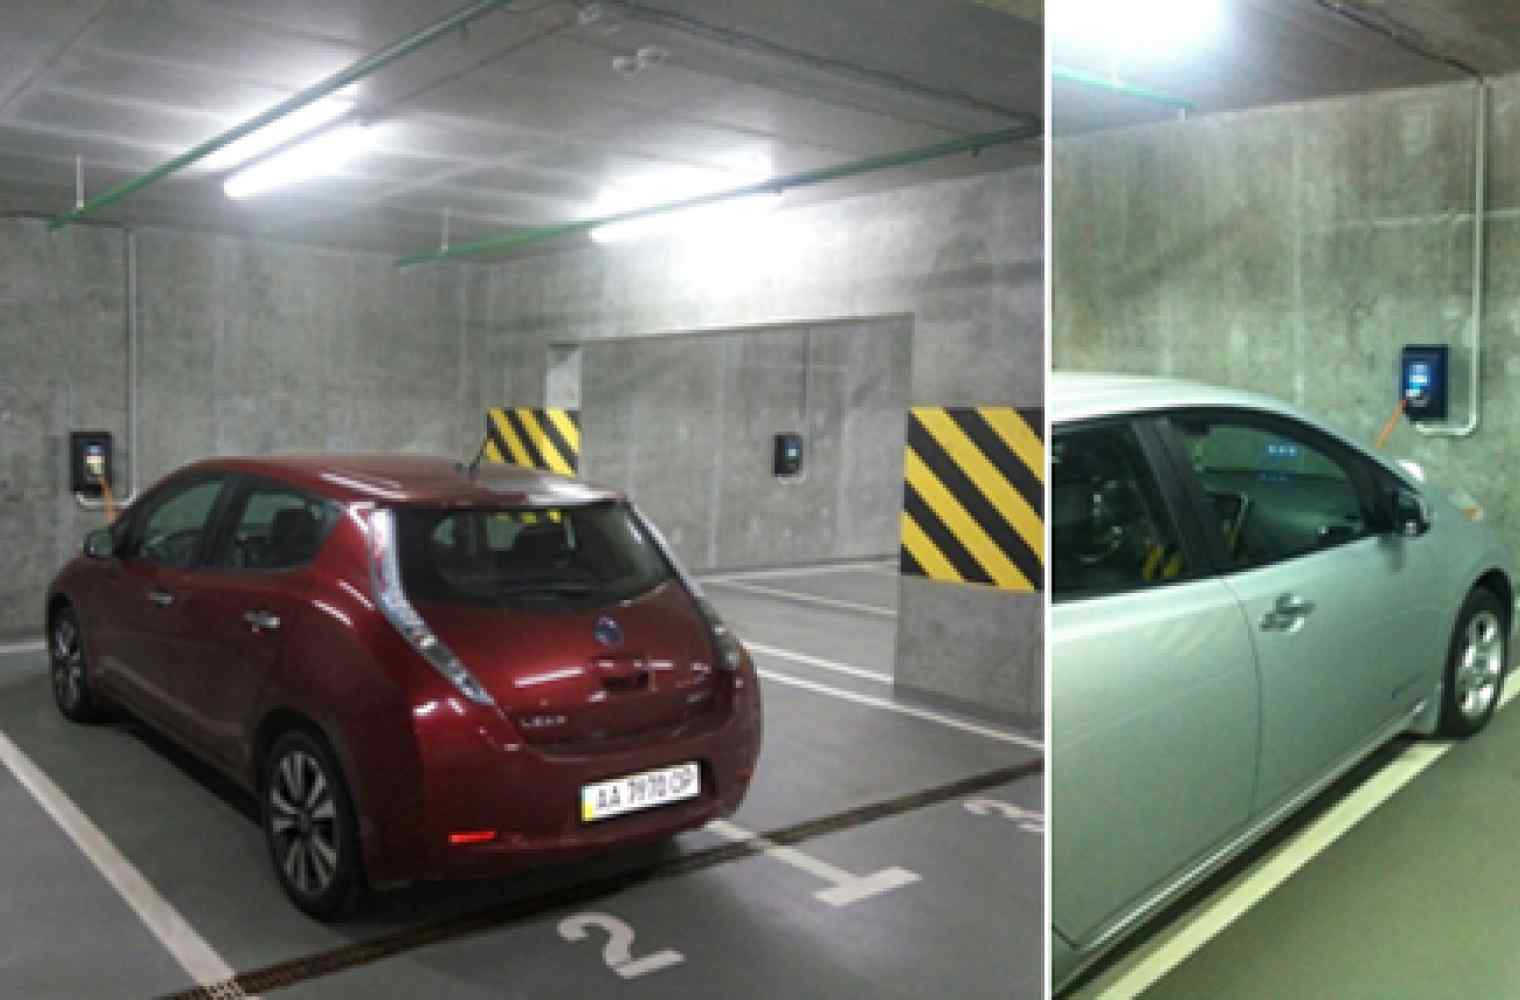 The IQ Business Center installed charging stations for electric vehicles